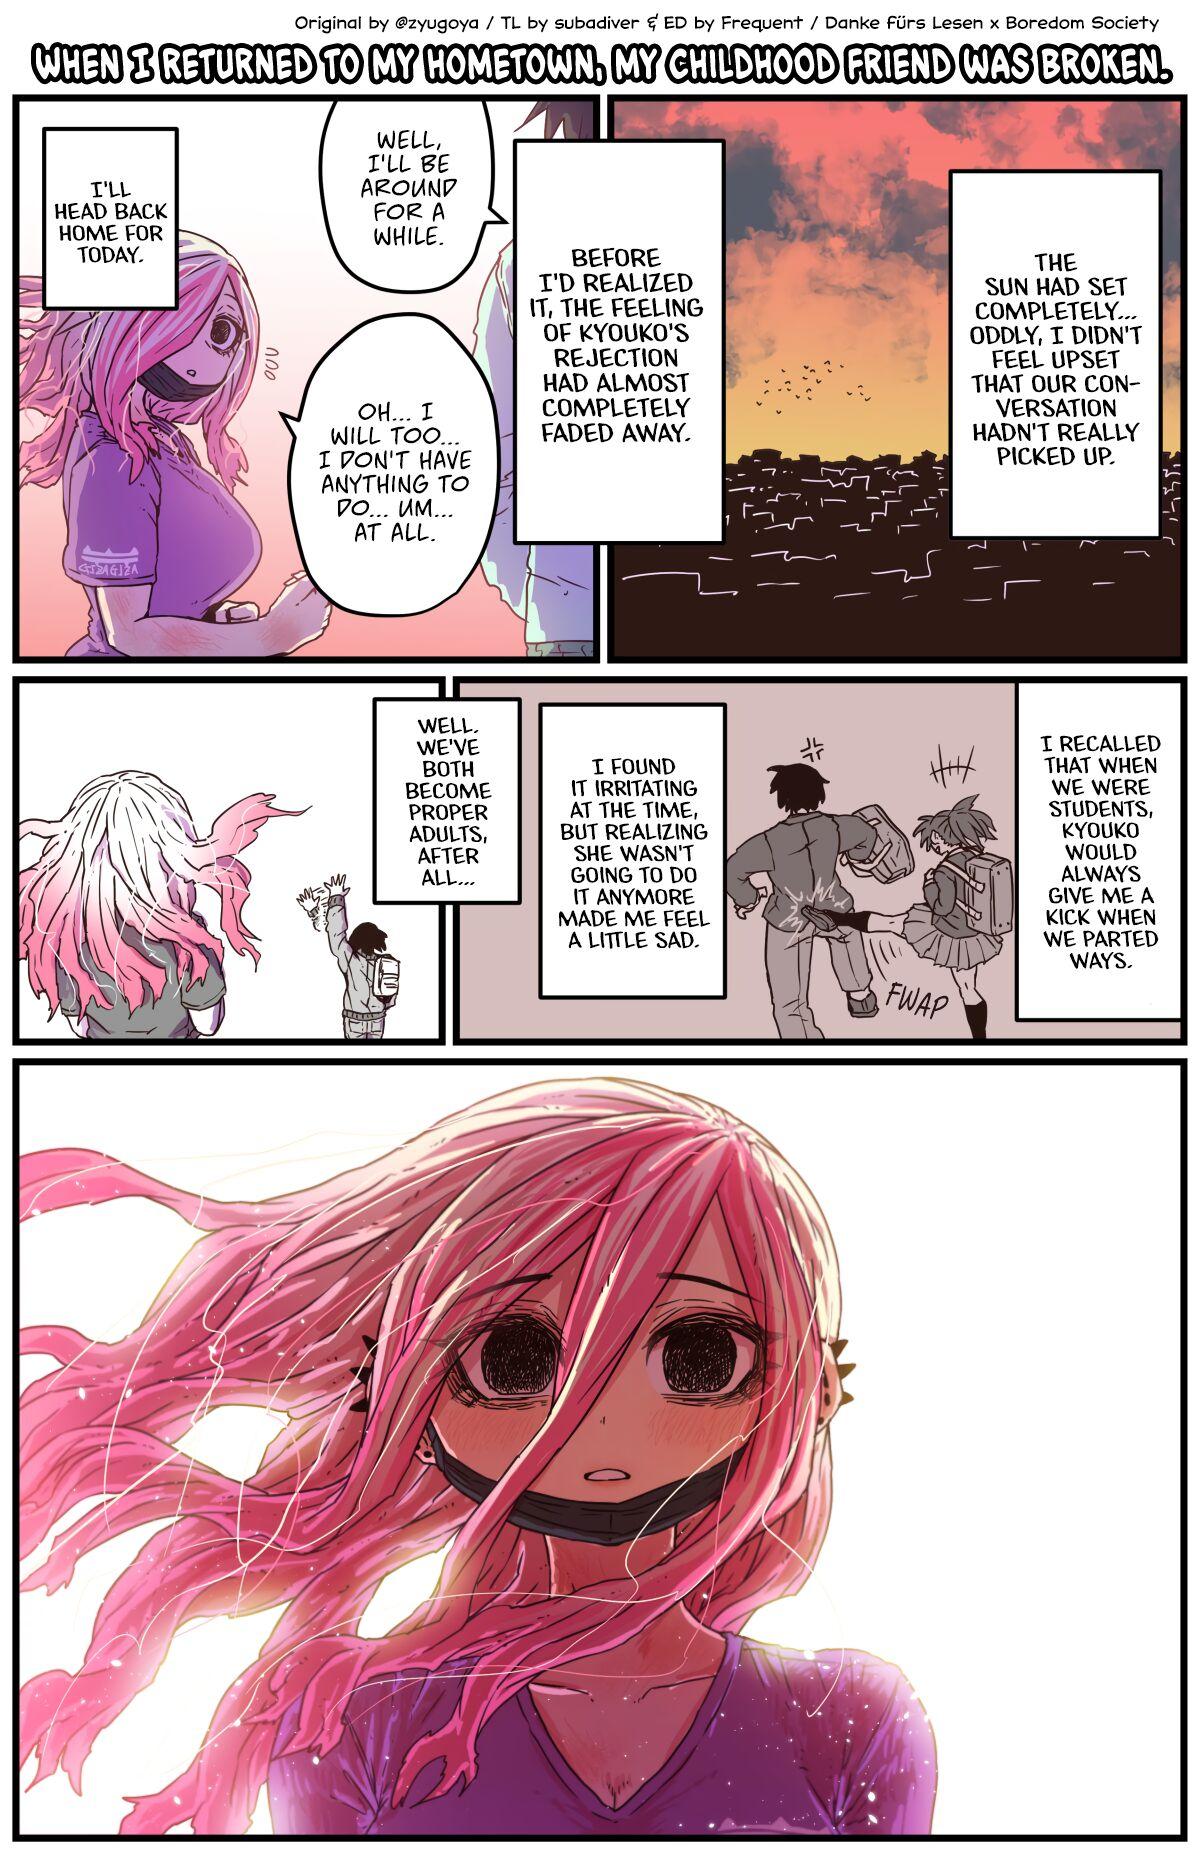 This When I Returned to My Hometown, My Childhood Friend was Broken - Original Big Booty - Page 5